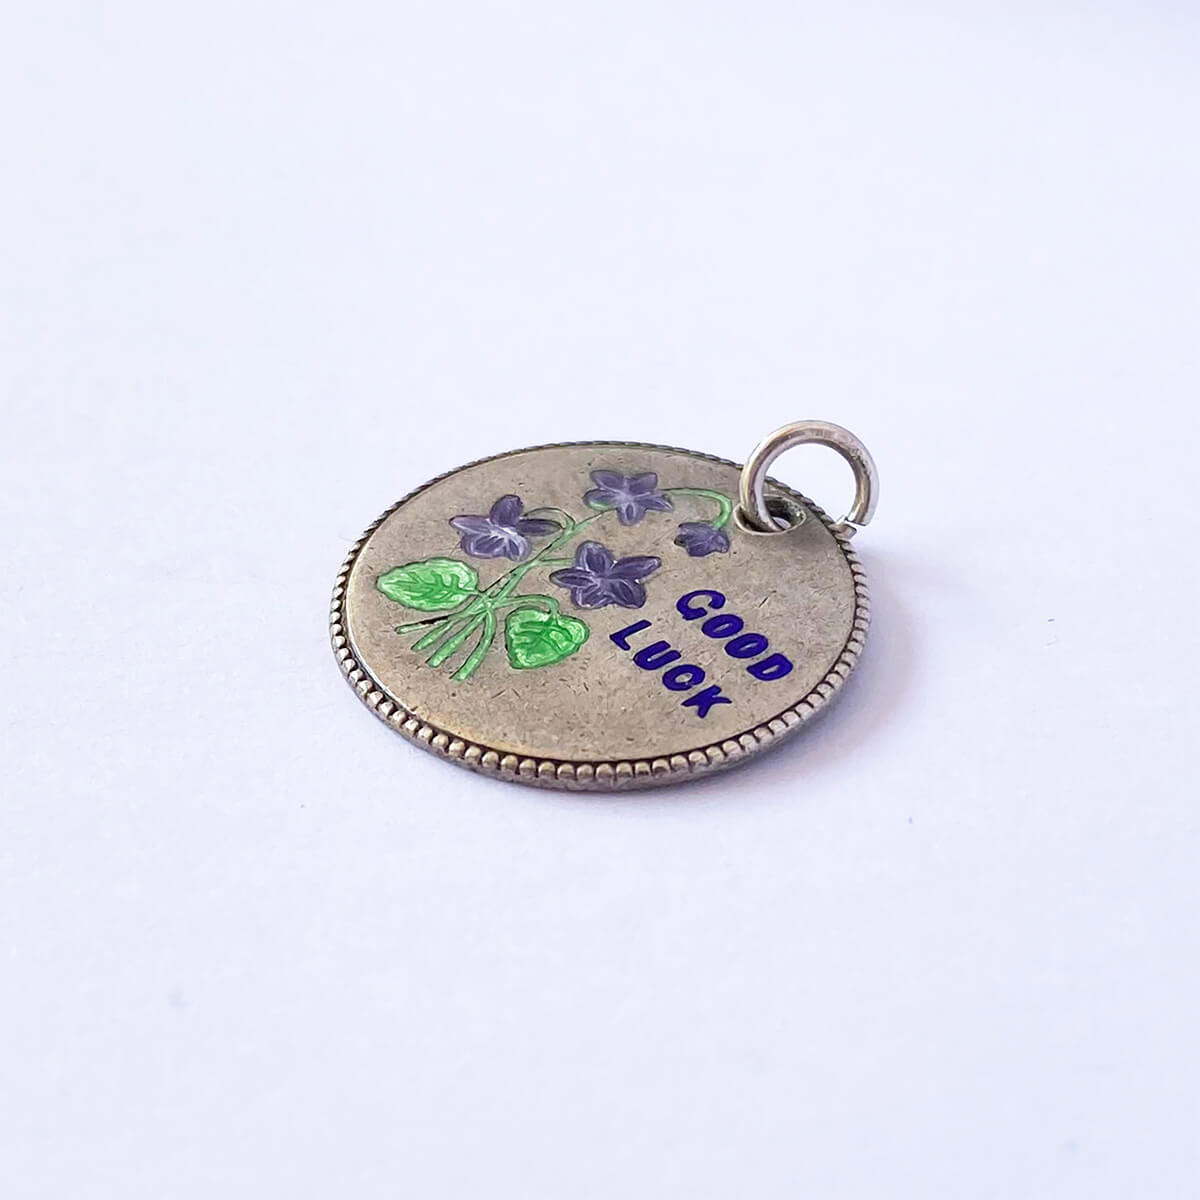 Vintage wild violets disc tag lucky charm sterling silver pendant